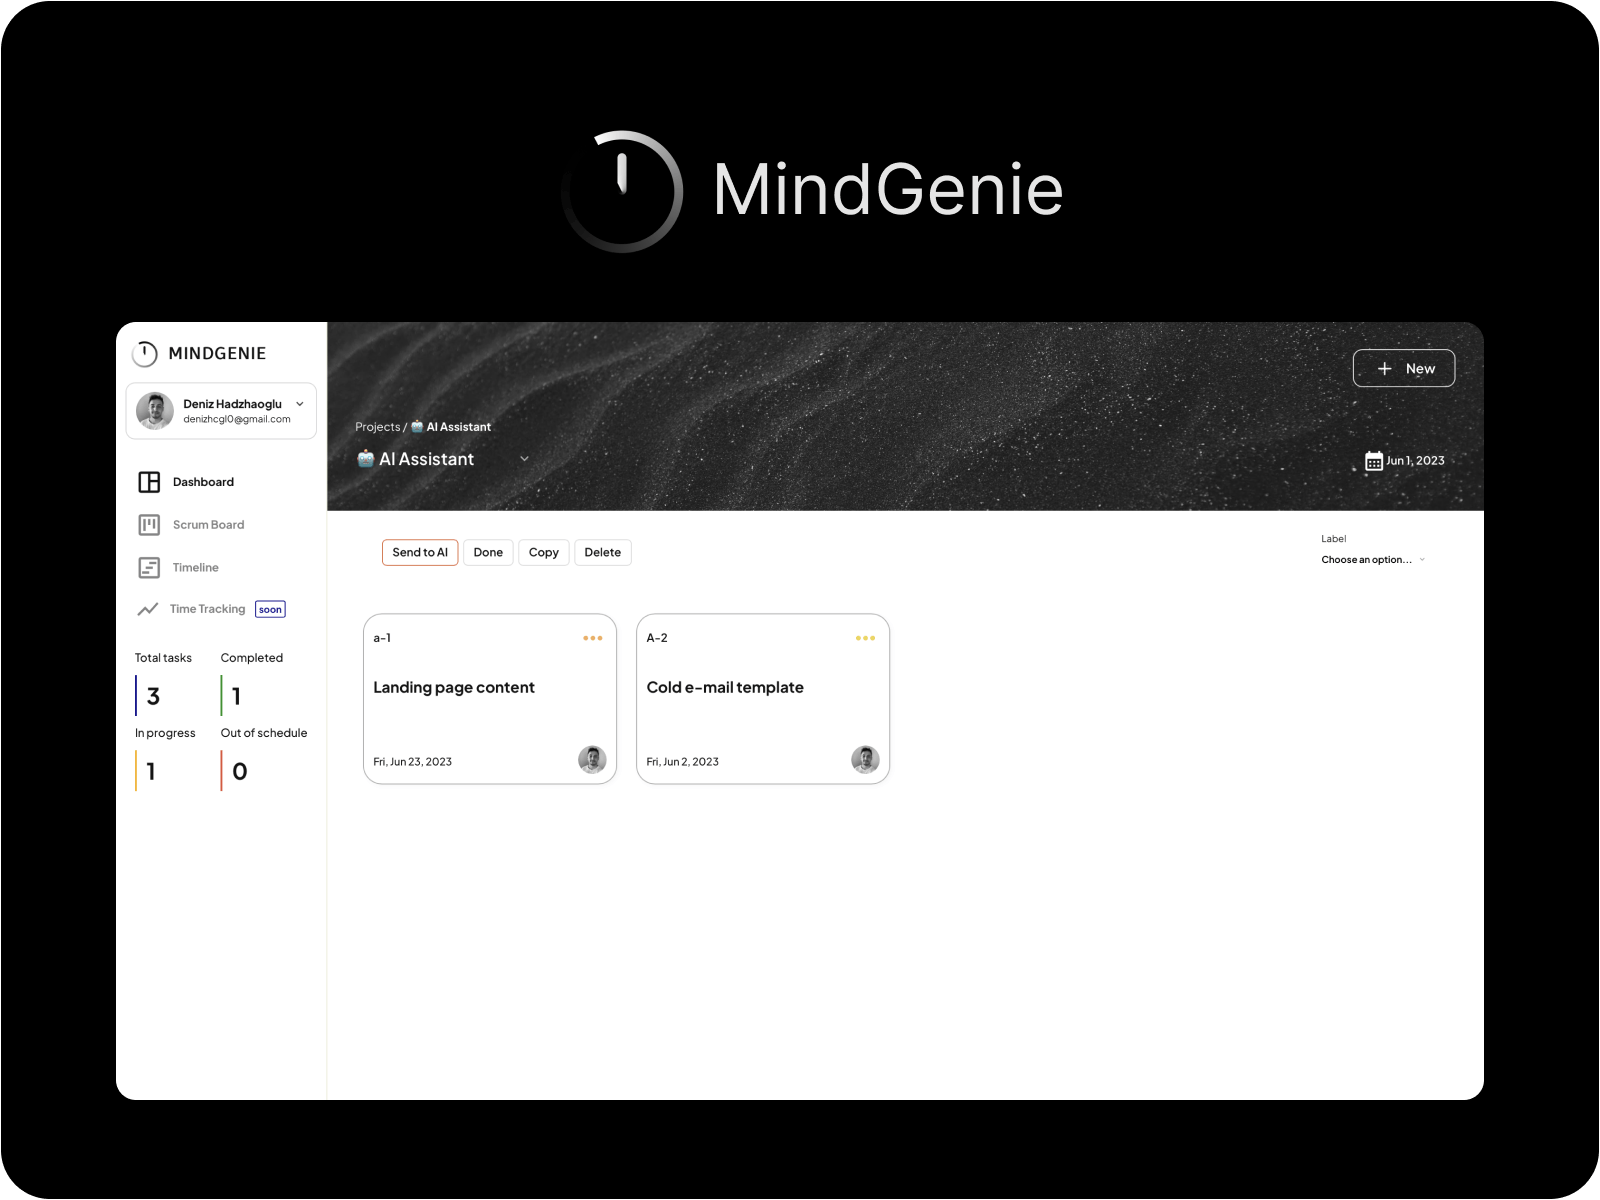 MindGenie - A time-management solution to plan, optimize tasks and activities